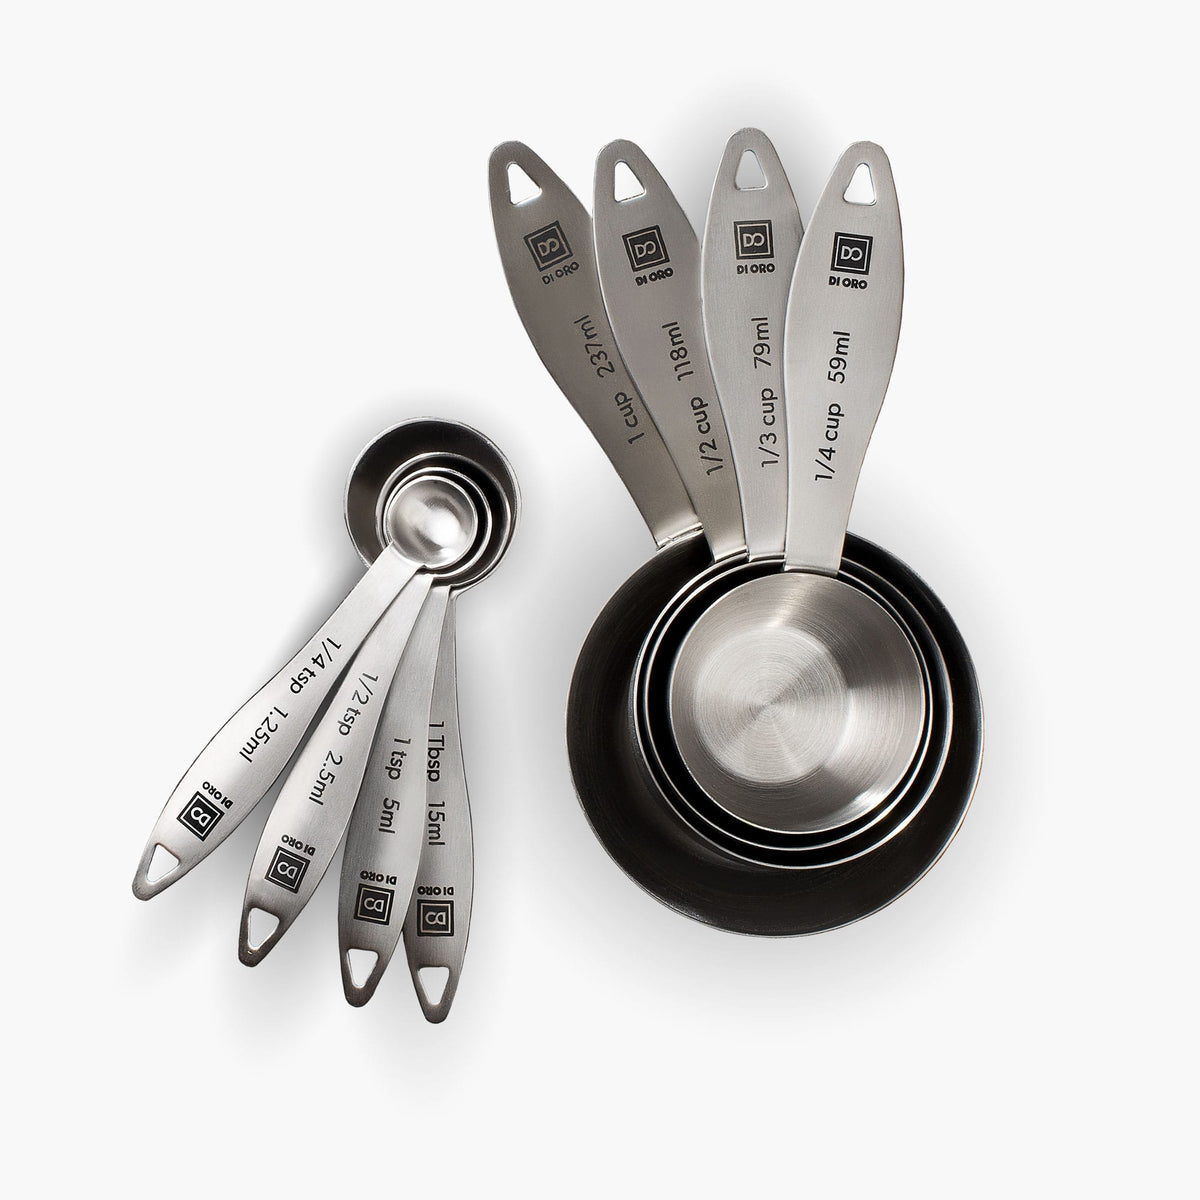 http://dioro.com/cdn/shop/products/8-piece-188-stainless-steel-measuring-cup-and-spoon-set-673551_1200x1200.jpg?v=1632181953